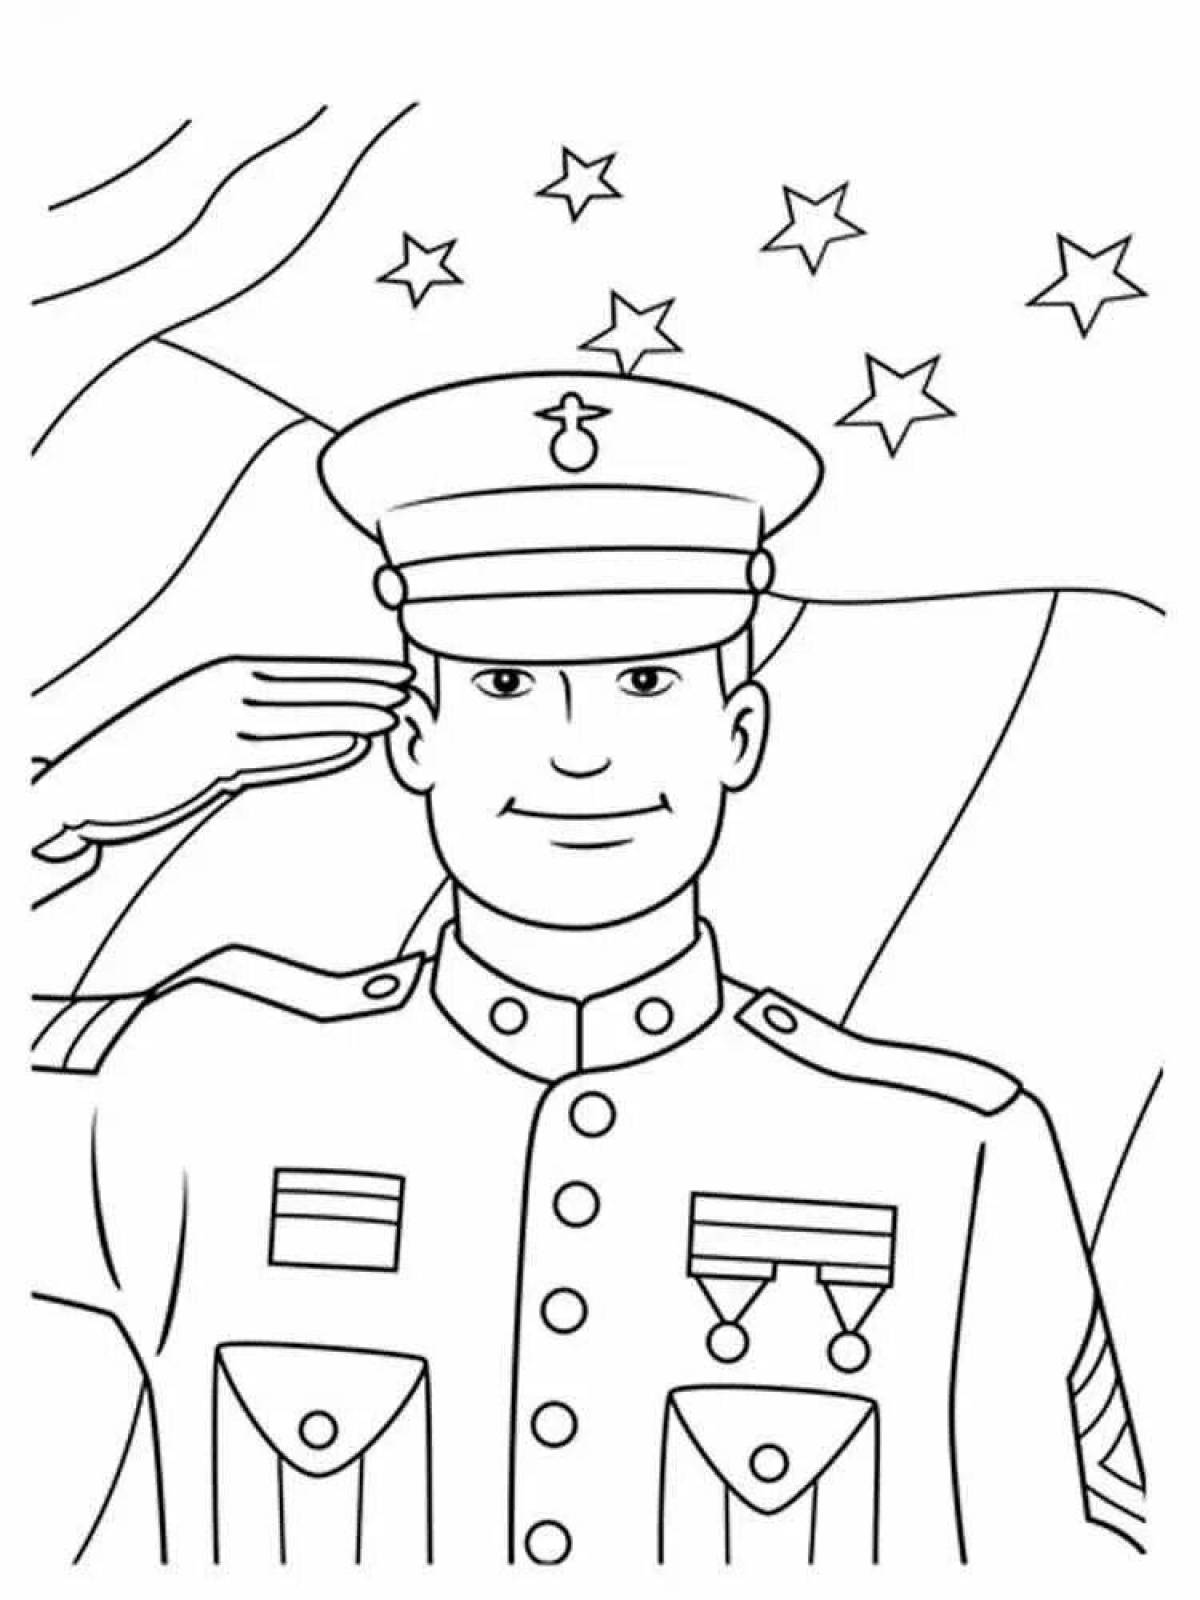 Shining defenders of the fatherland coloring page